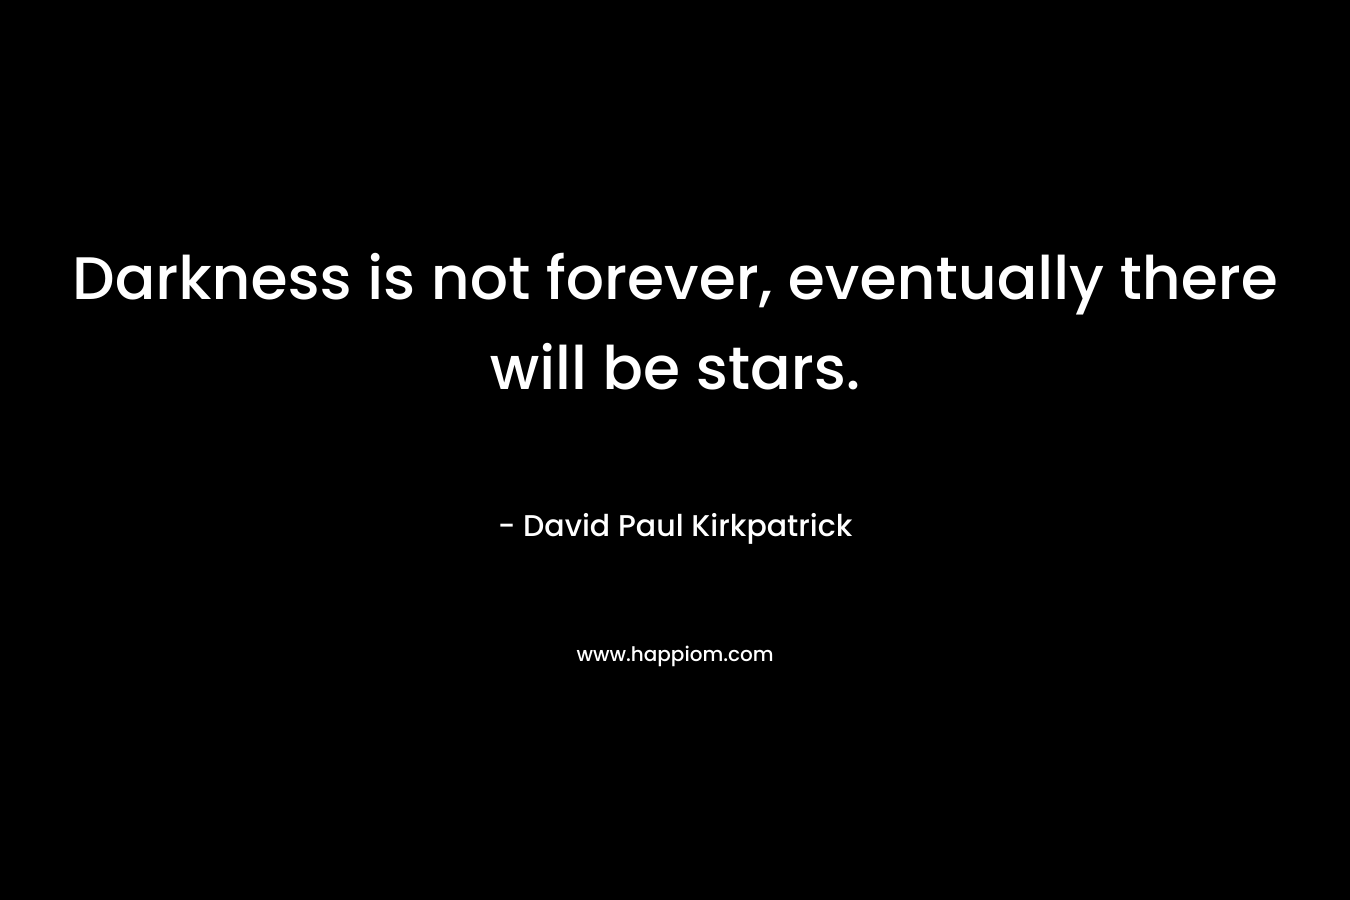 Darkness is not forever, eventually there will be stars.